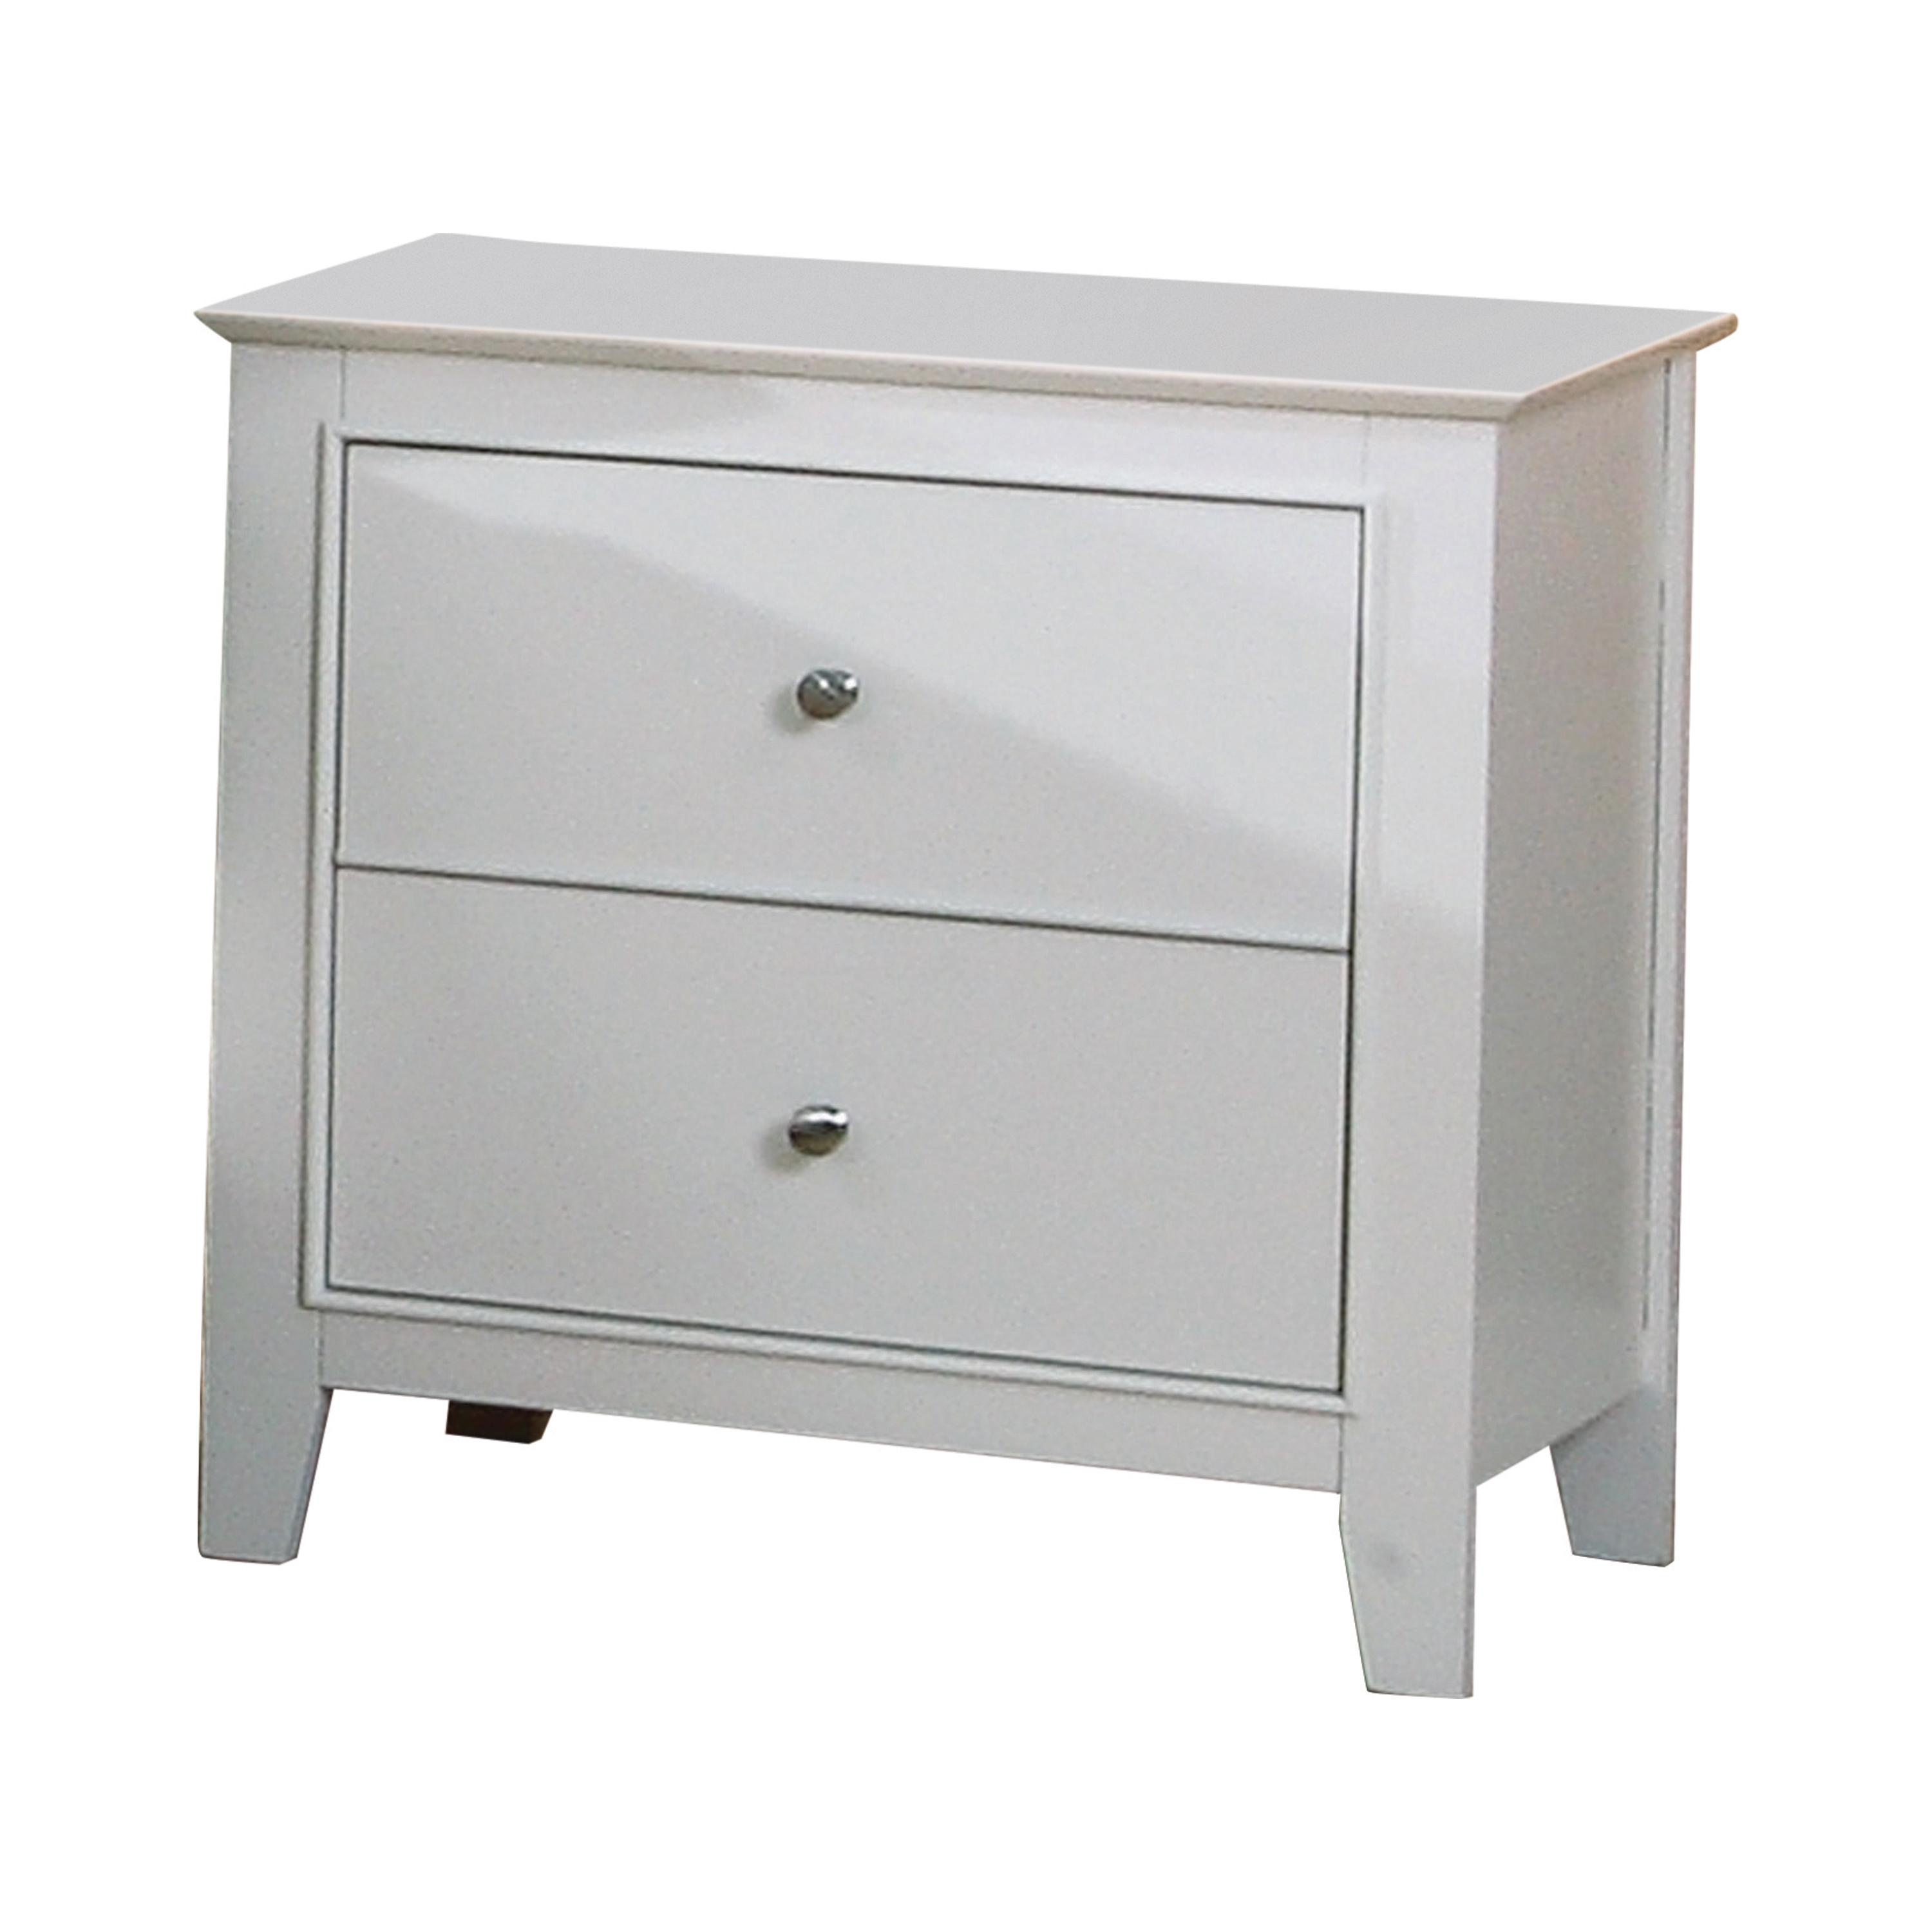 Cottage Nightstand 400232 Selena 400232 in White 